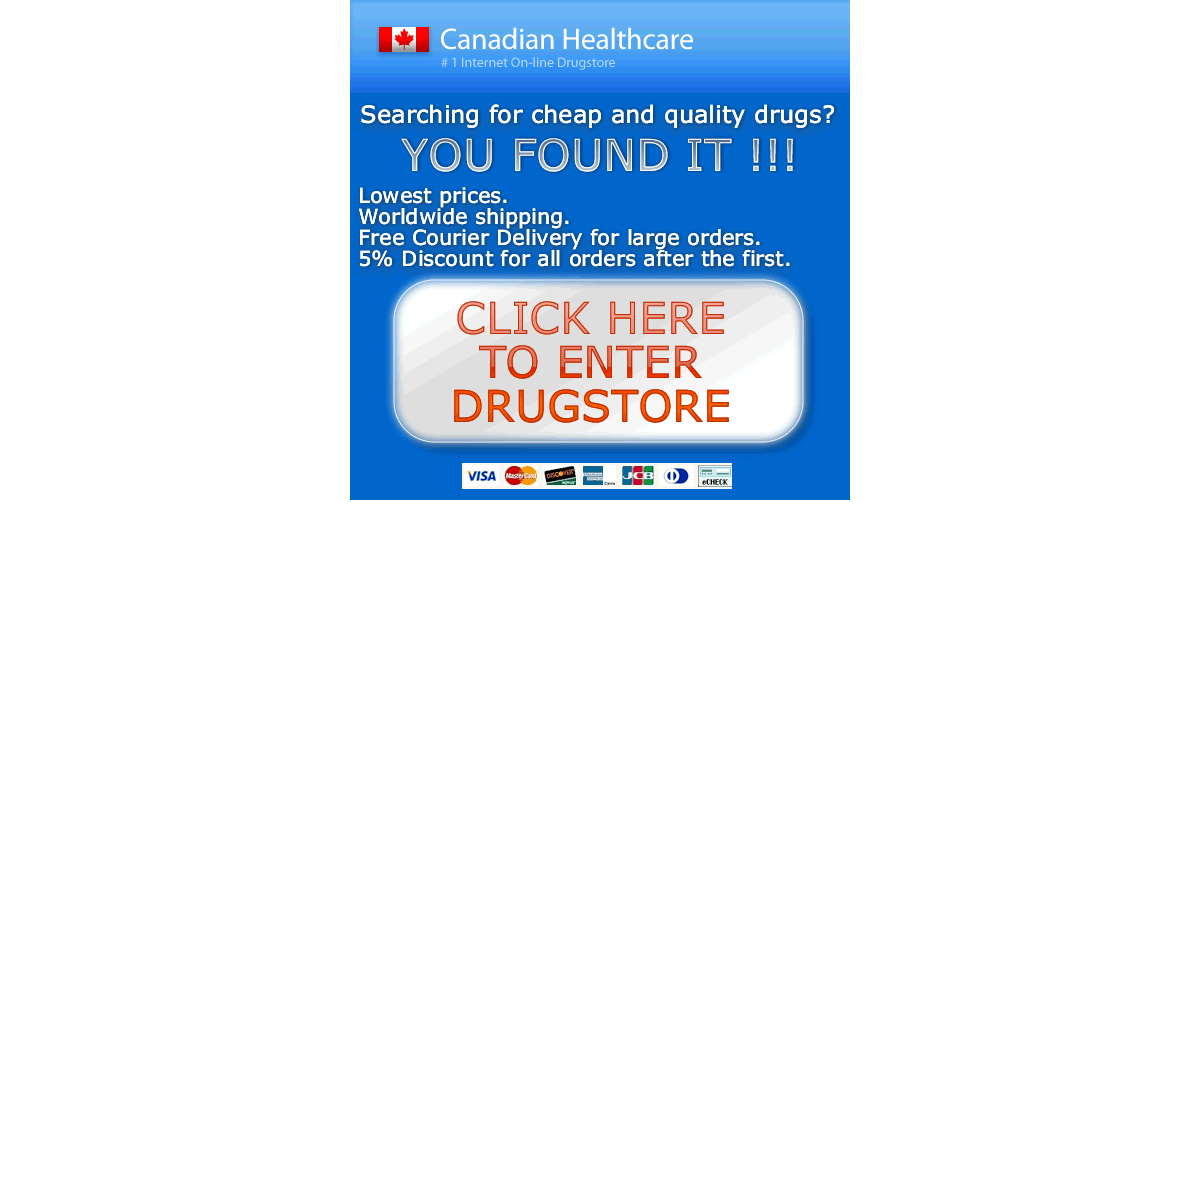 A complete backup of canadianpharmacyonlinesrvh.com